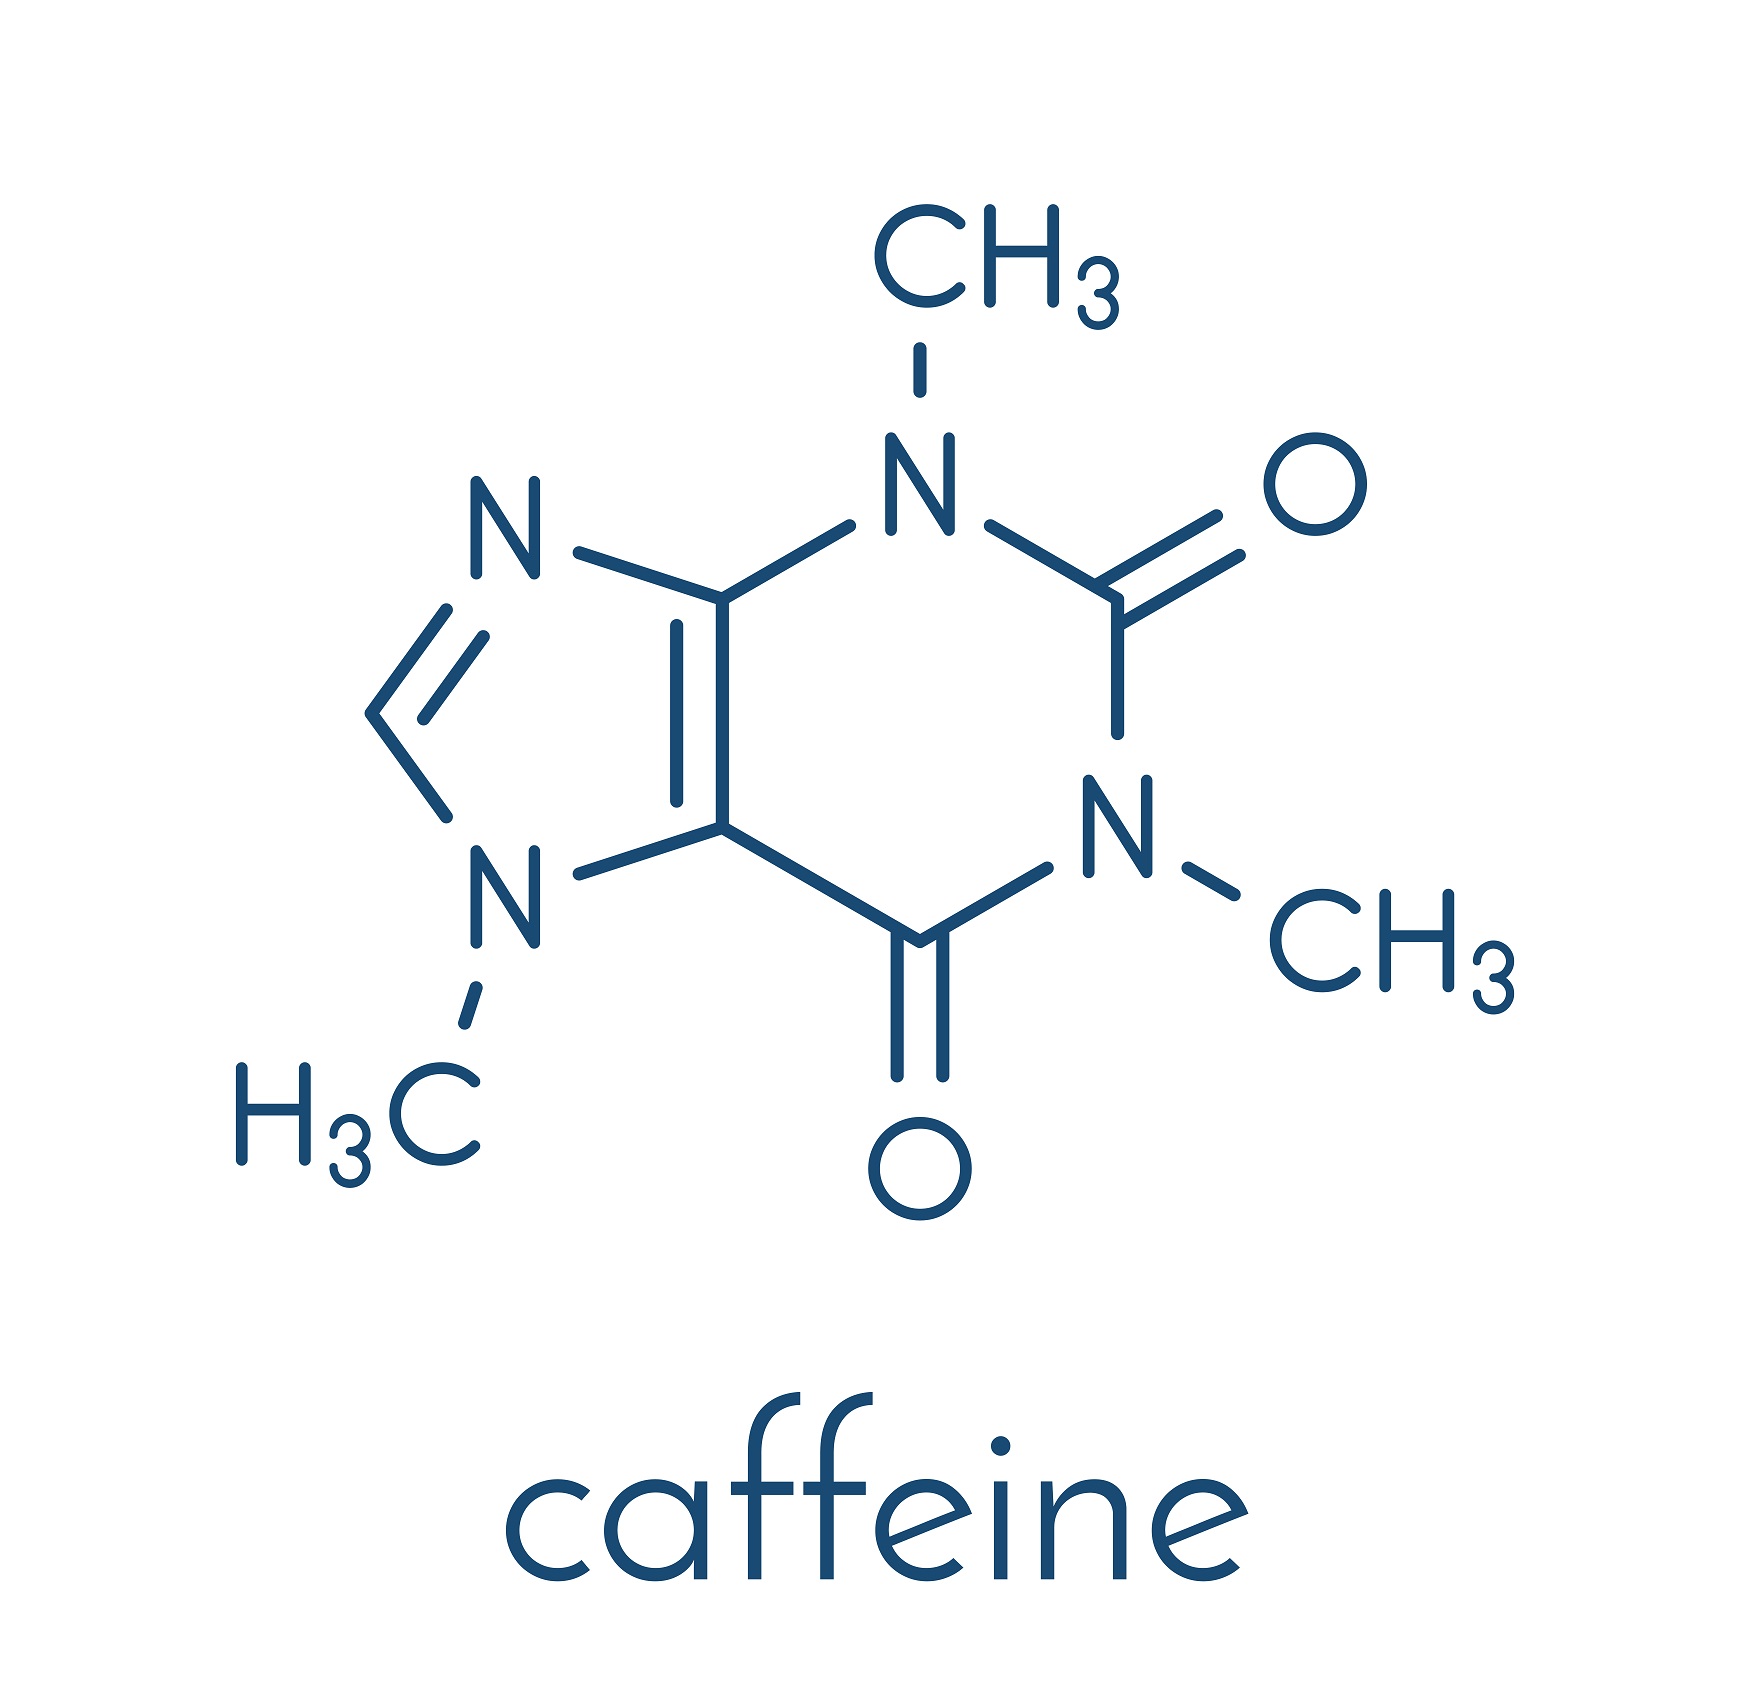 Caffeine - the most known and effective stimulant. Nearly staple in pre-workout supplements